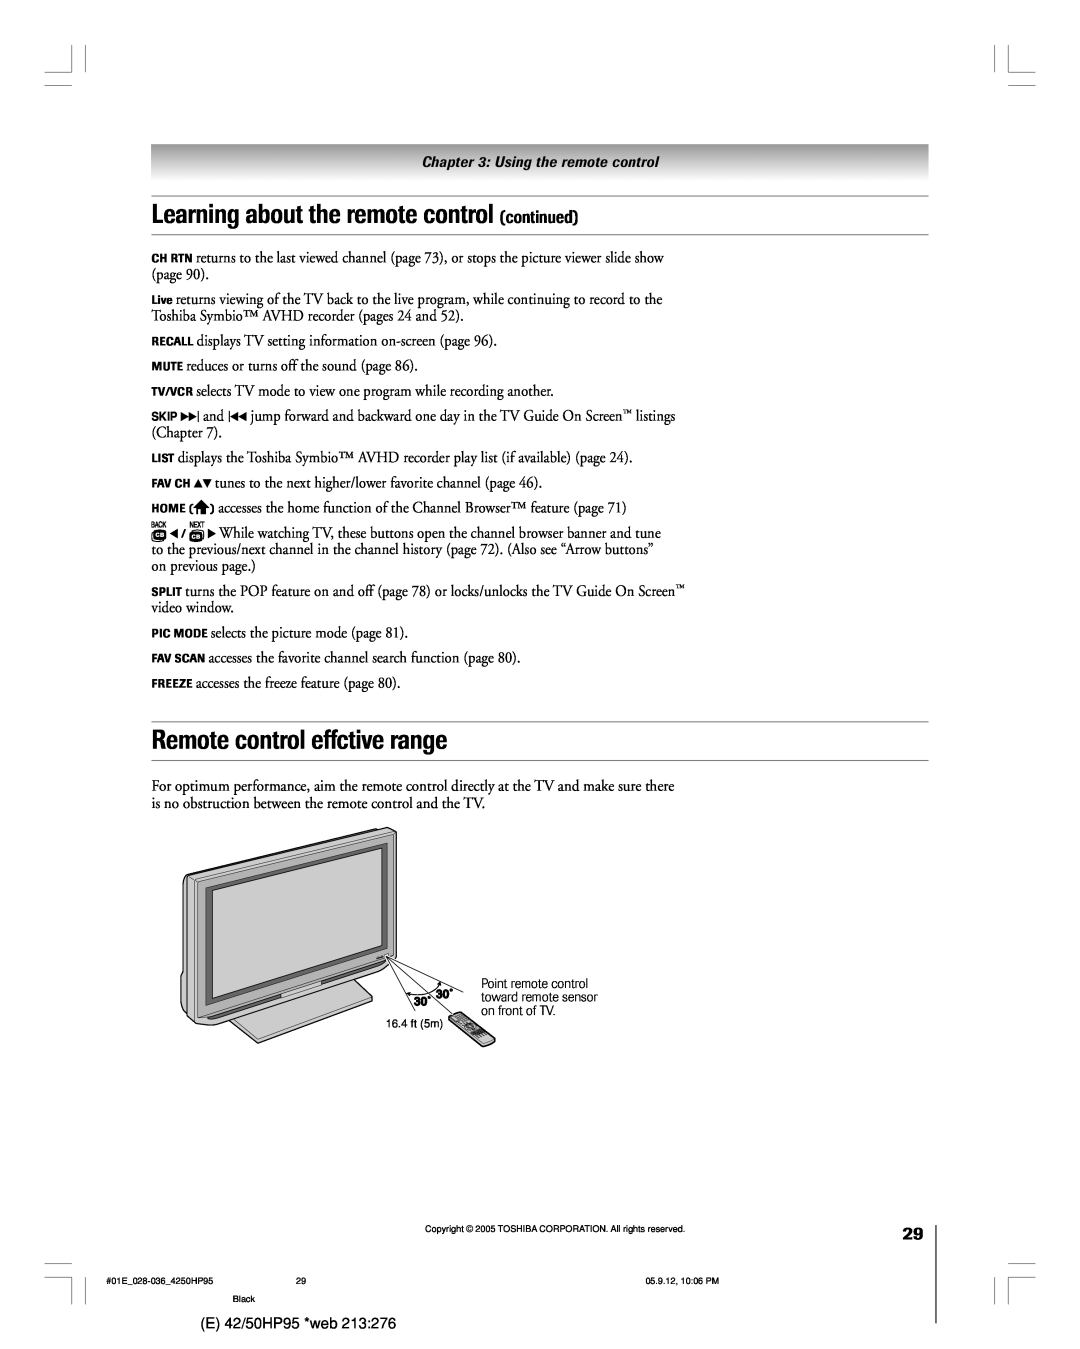 Toshiba 42HP95 owner manual Learning about the remote control continued, Remote control effctive range 